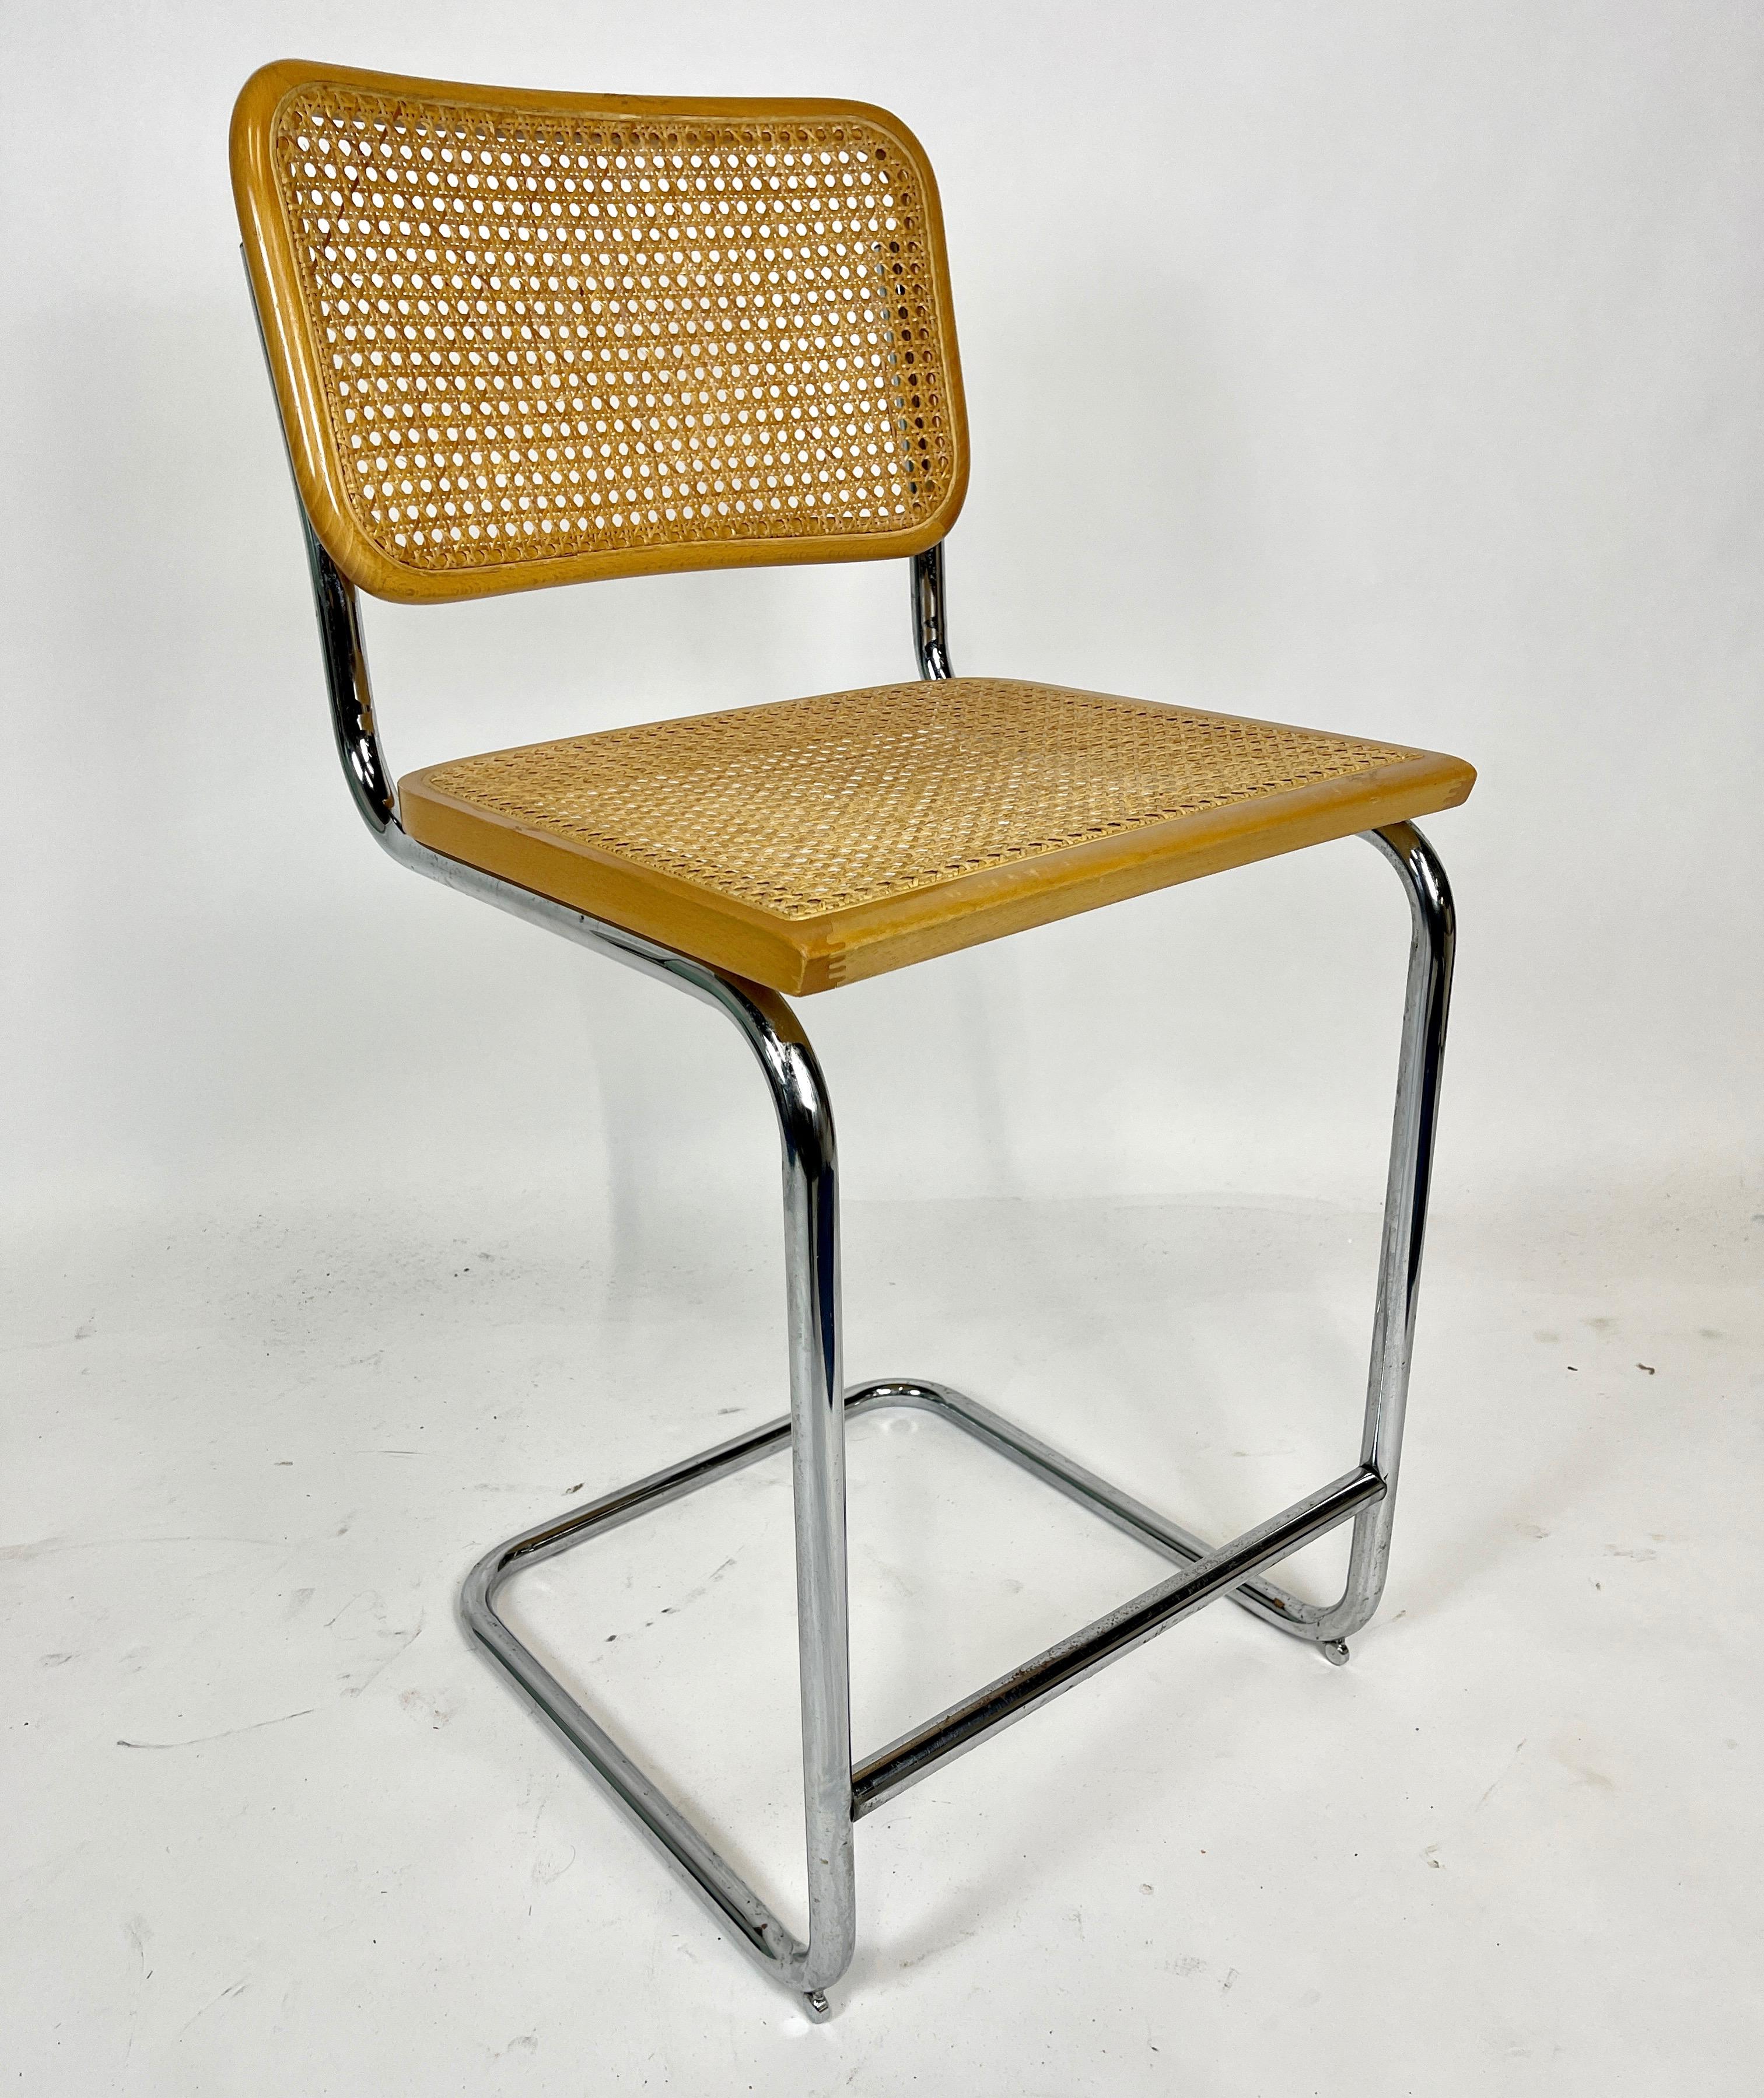 Italian Pair of Marcel Breuer Cane, Birch, and Chrome Cesca Stools Made in Italy